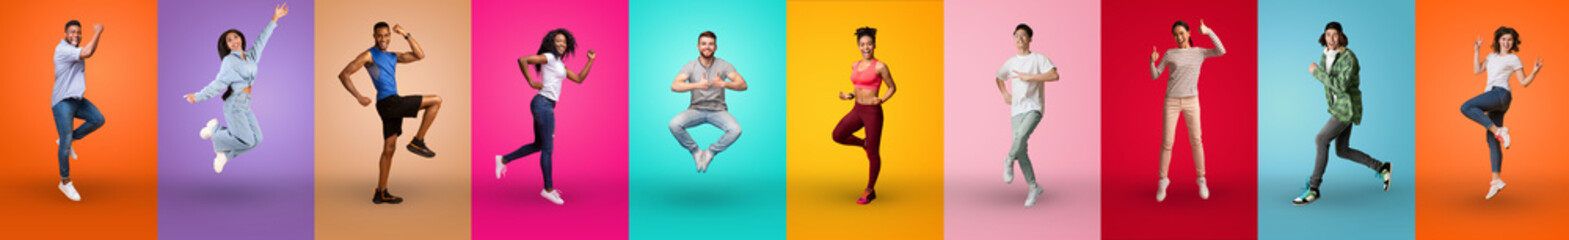 Happy millennial men and women gesturing on colorful backgrounds, collage